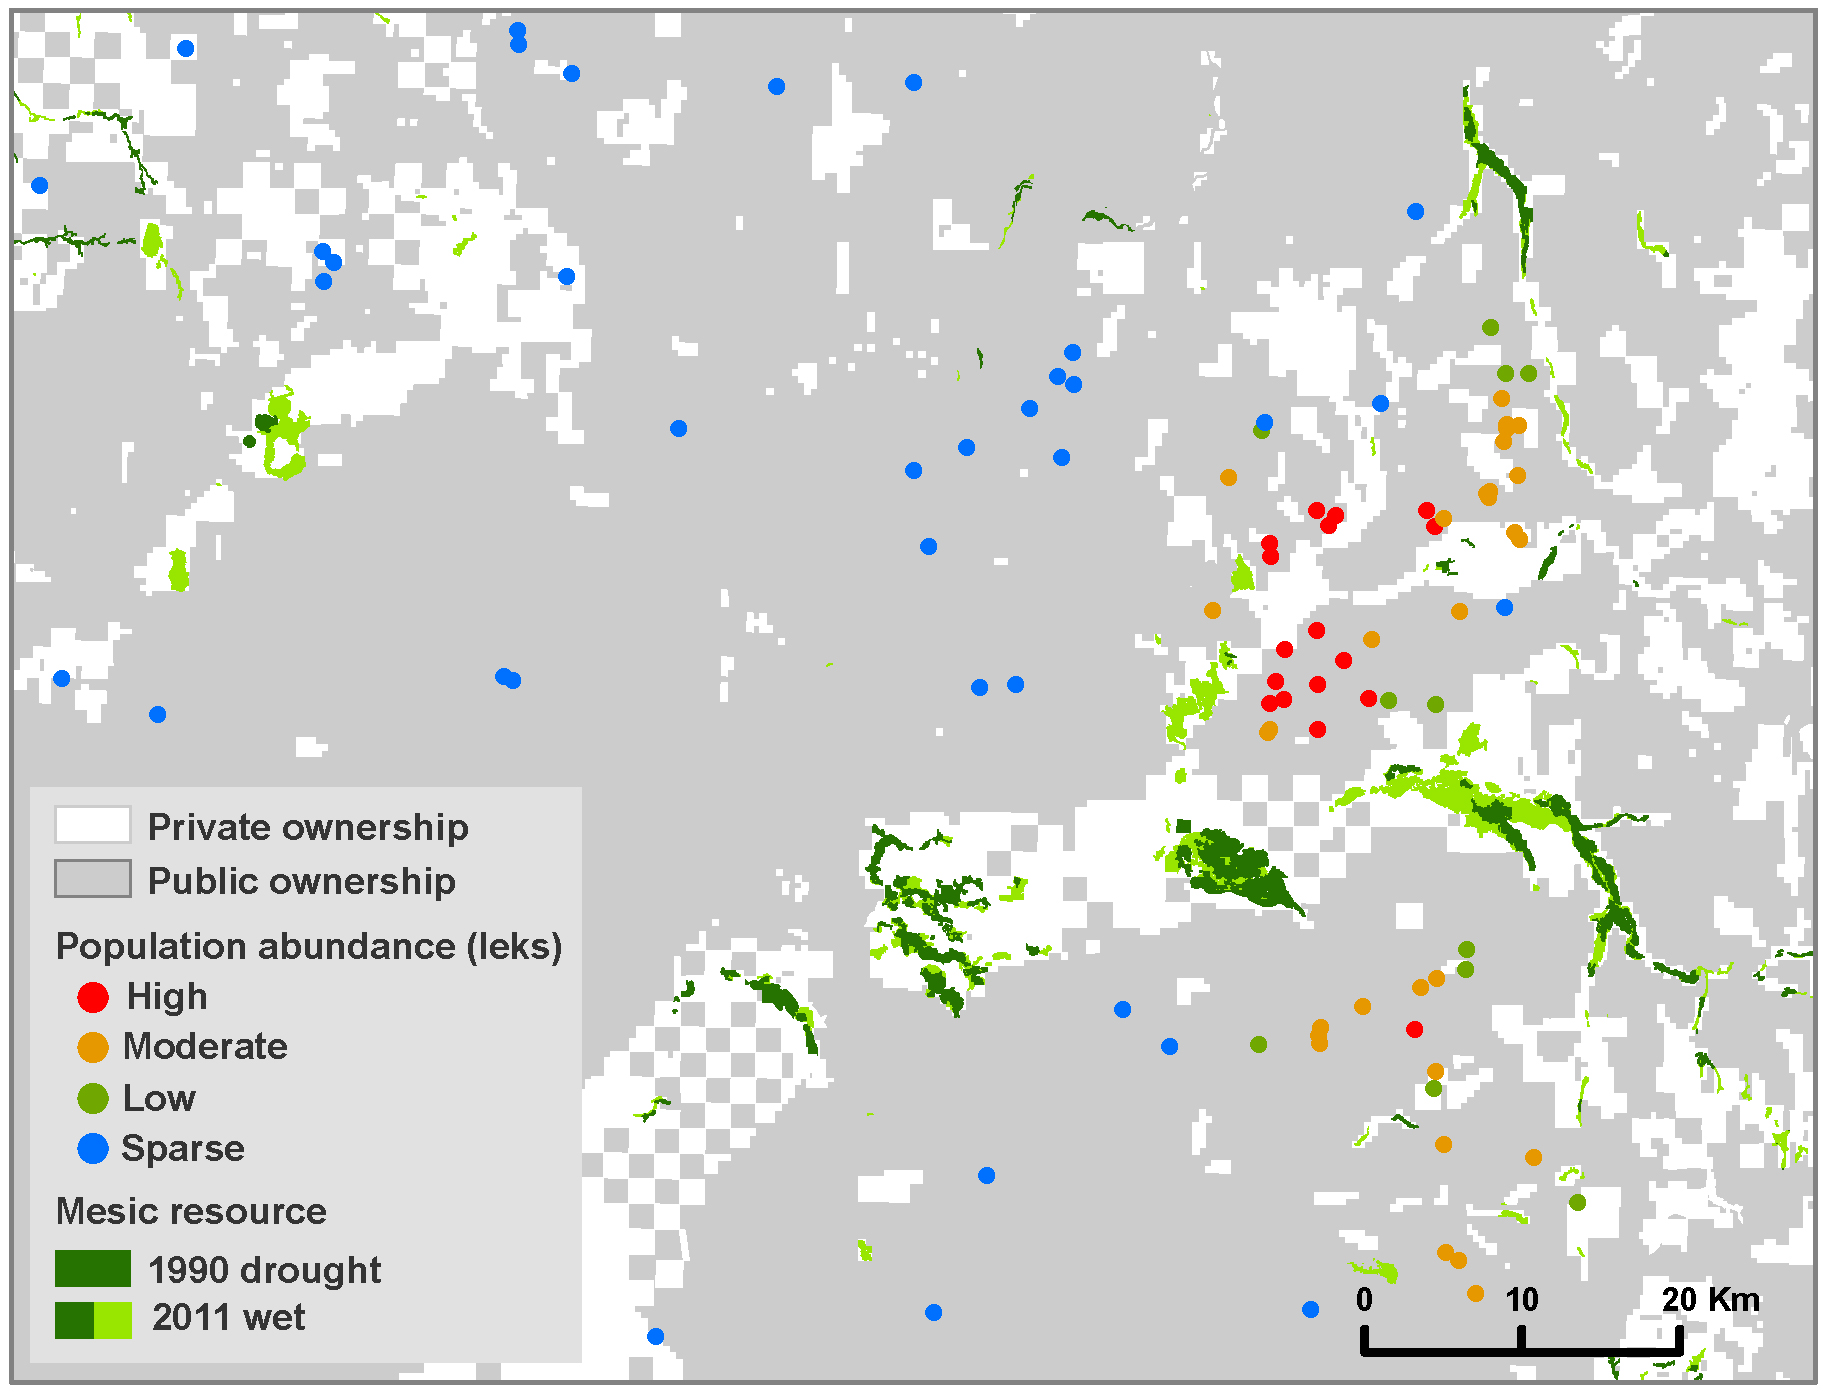 Example of characteristic ownership and population distribution patterns observed. Private lands encompassed on average 75% of summer mesic resources. Distribution of breeding ground (leks) was a function of mesic resource proximity with the highest population abundances nearest reliable mesic sites. North is oriented toward the top of the image.